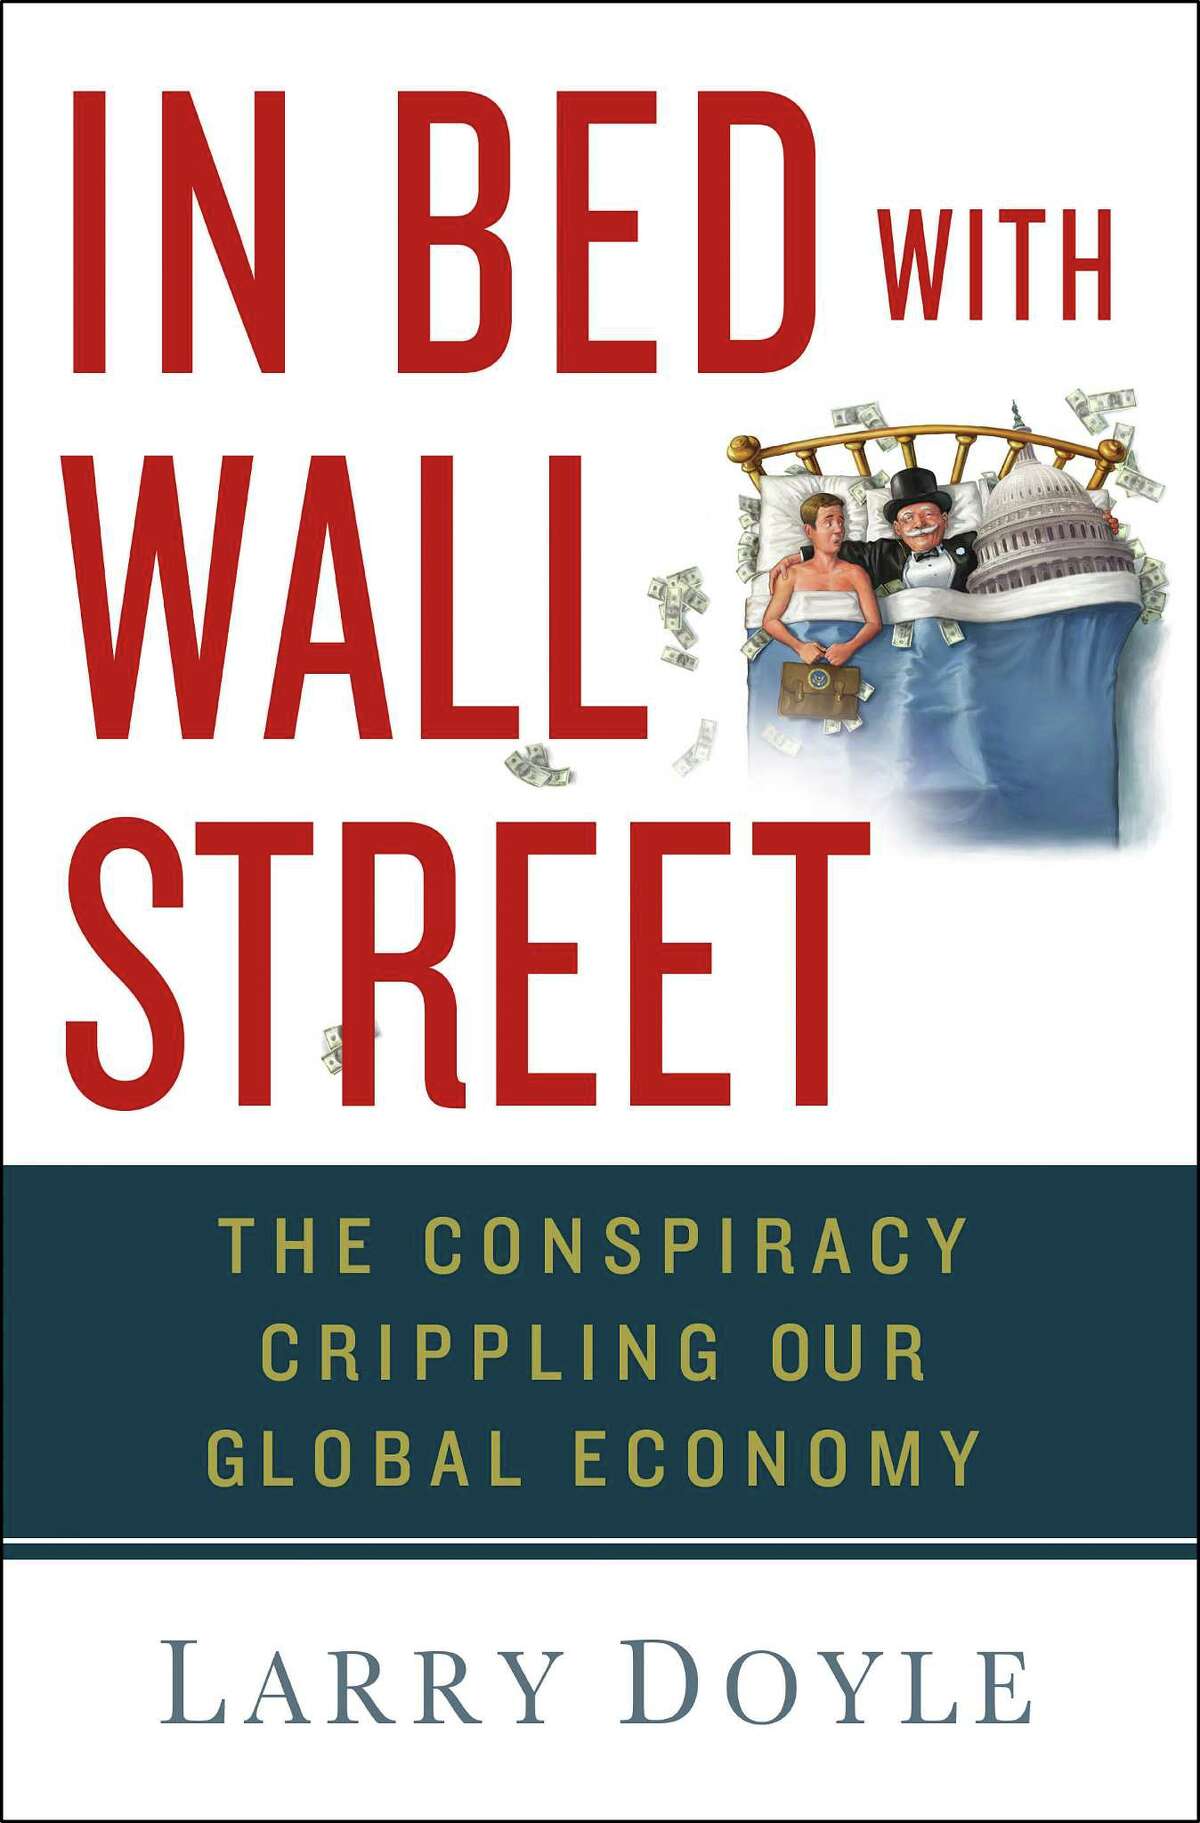 Wall Street street veteran and Greenwich resident Larry Doyle analyzes the unhealthy quid pro quo arrangements between the financial services industry and Washington politicians in his new book "In Bed with Wall Street."